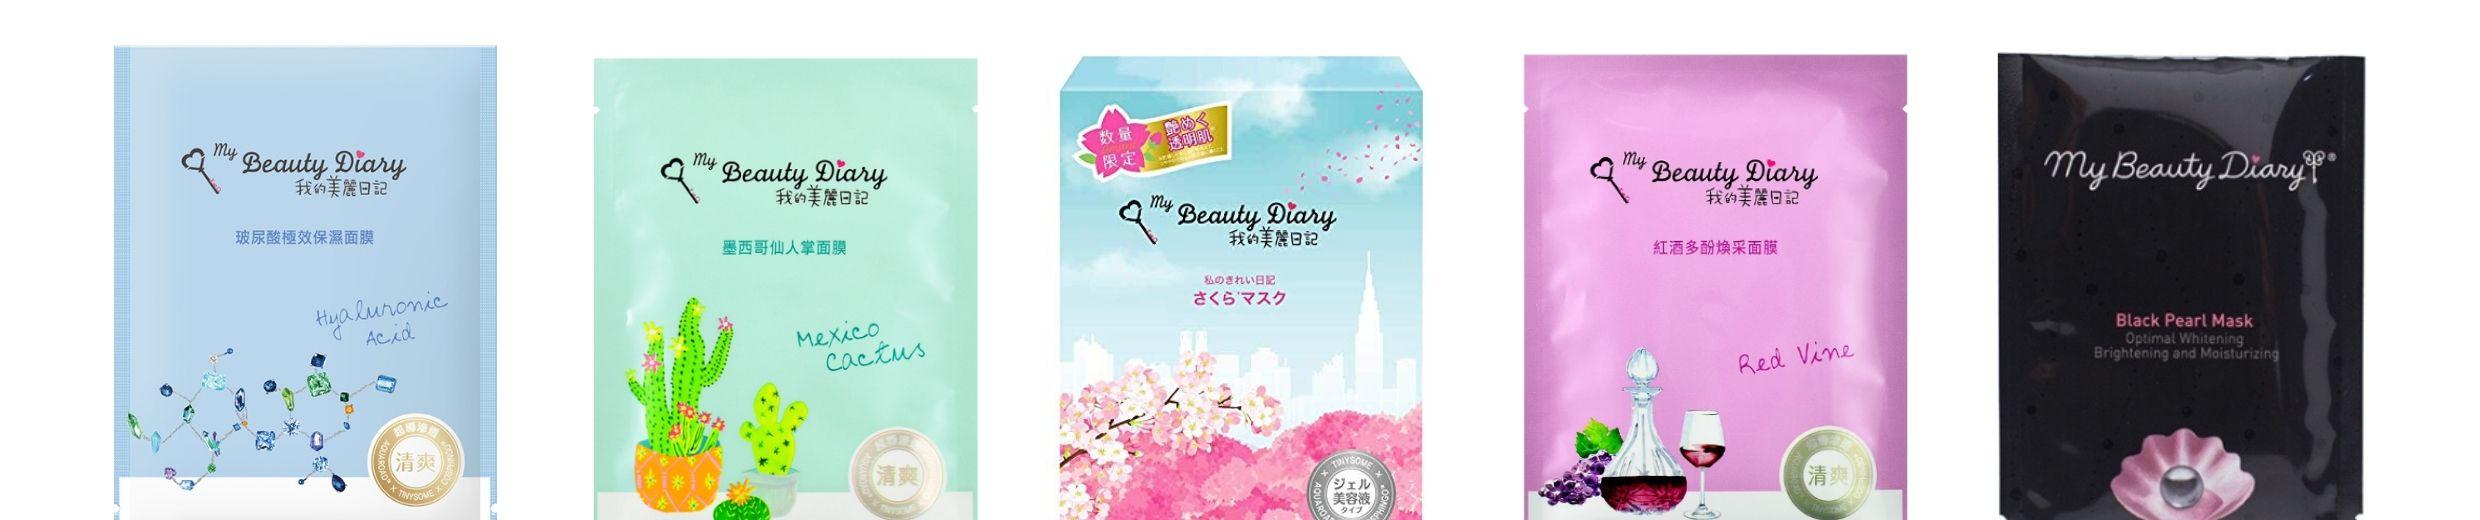 Fiddy’s Top 5 Sheet Masks From Hot Taiwanese Beauty Brand My Beauty Diary